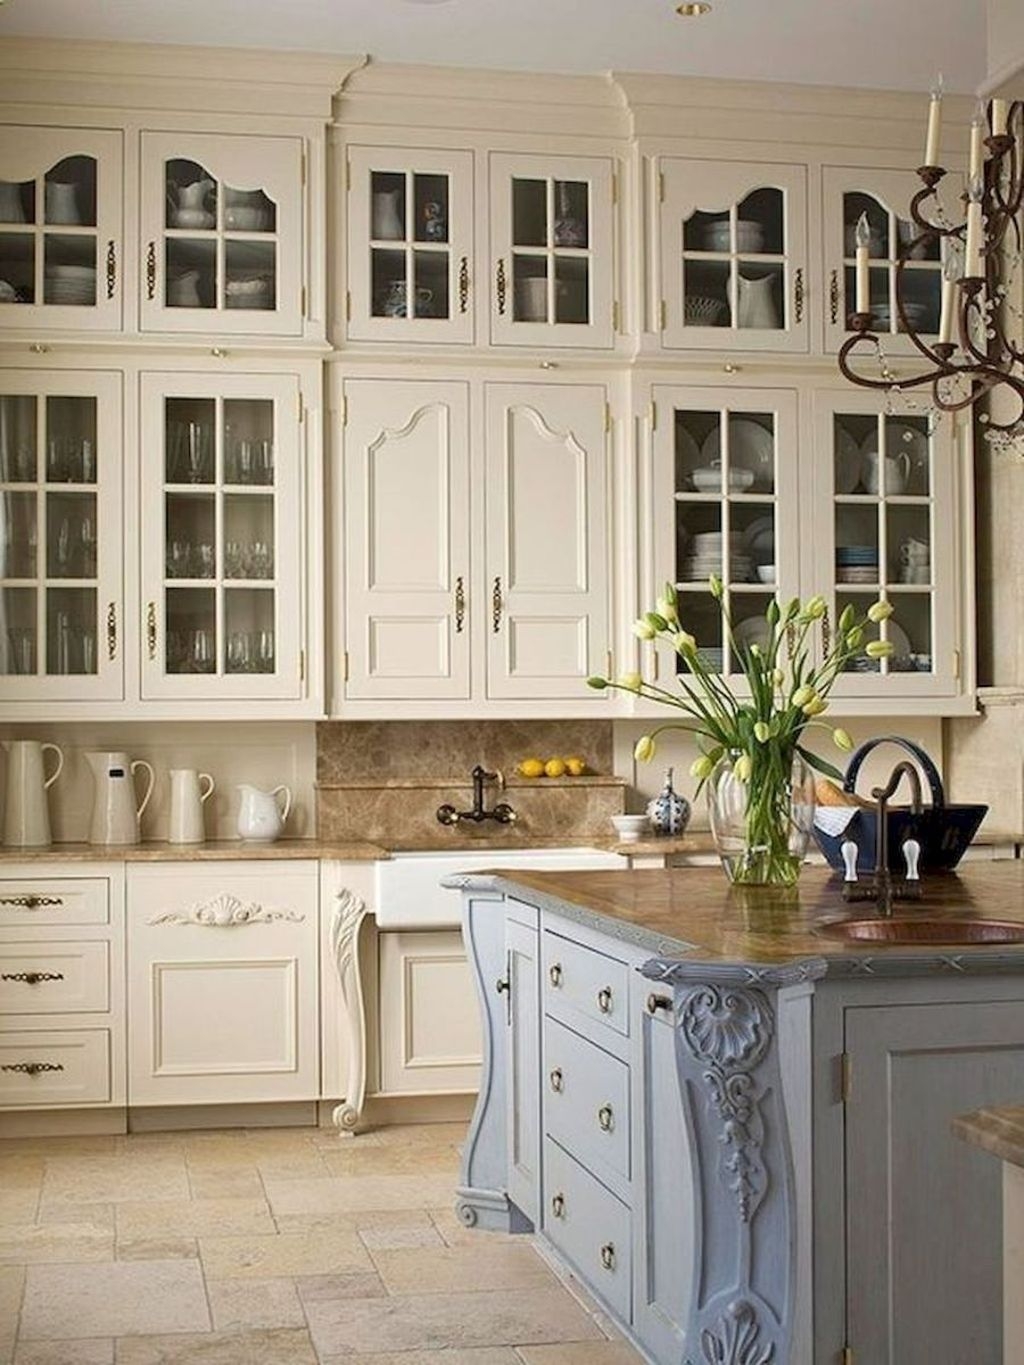 The Best French Country Style Kitchen Decor Ideas 29   PIMPHOMEE